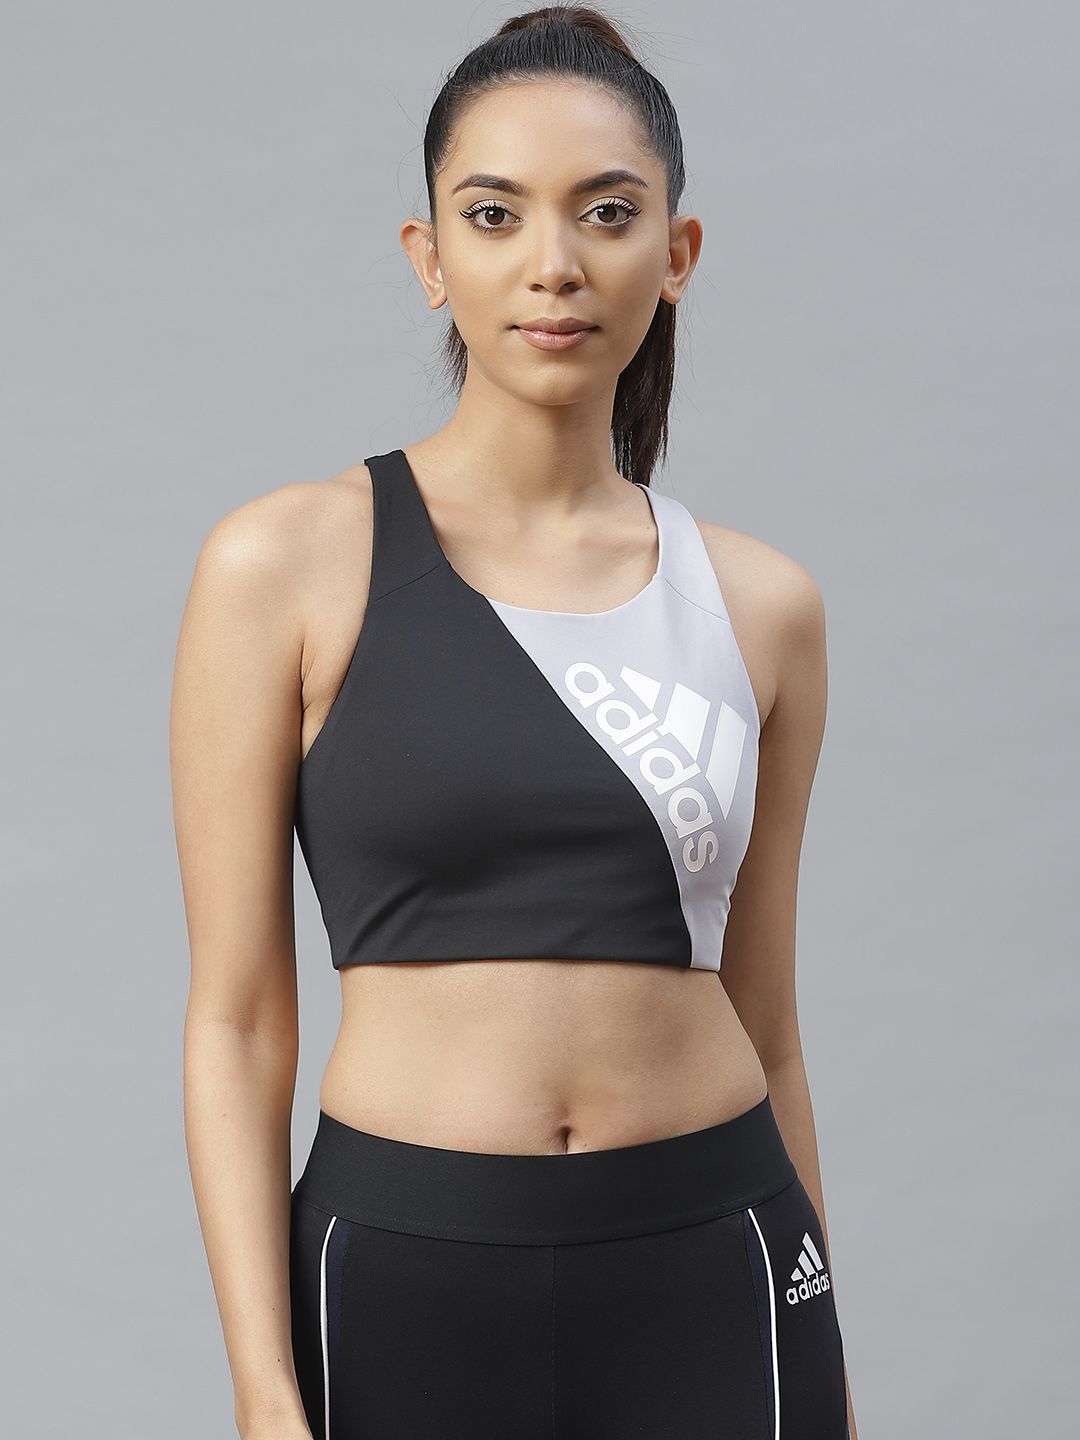 ADIDAS Women Black and Grey Printed Ultimate Alphaskin Badge Training Bra FT3135 Price in India